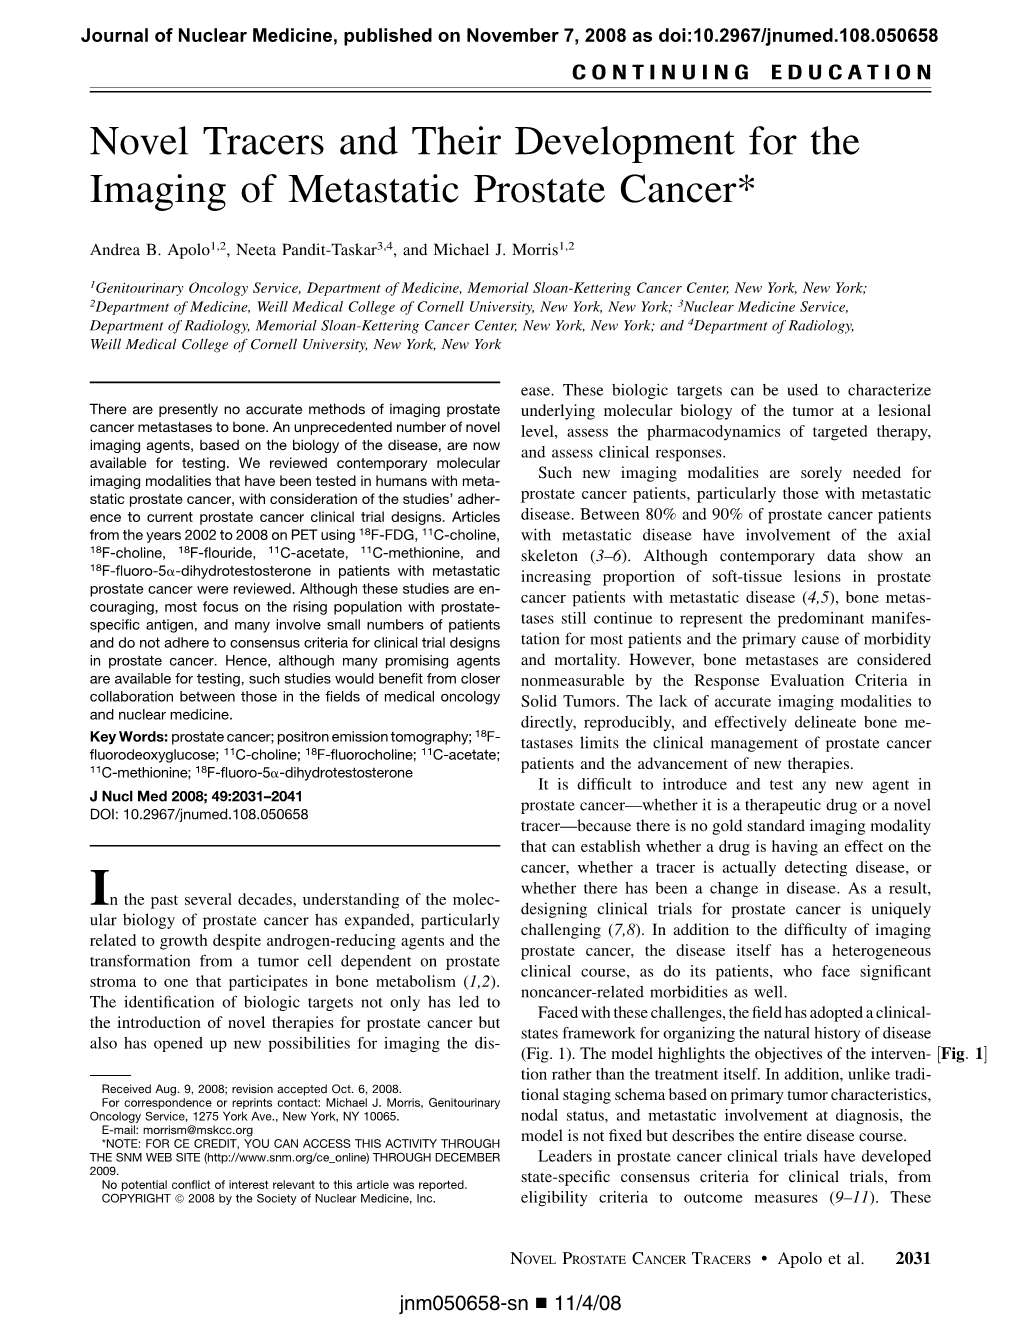 Novel Tracers and Their Development for the Imaging of Metastatic Prostate Cancer*